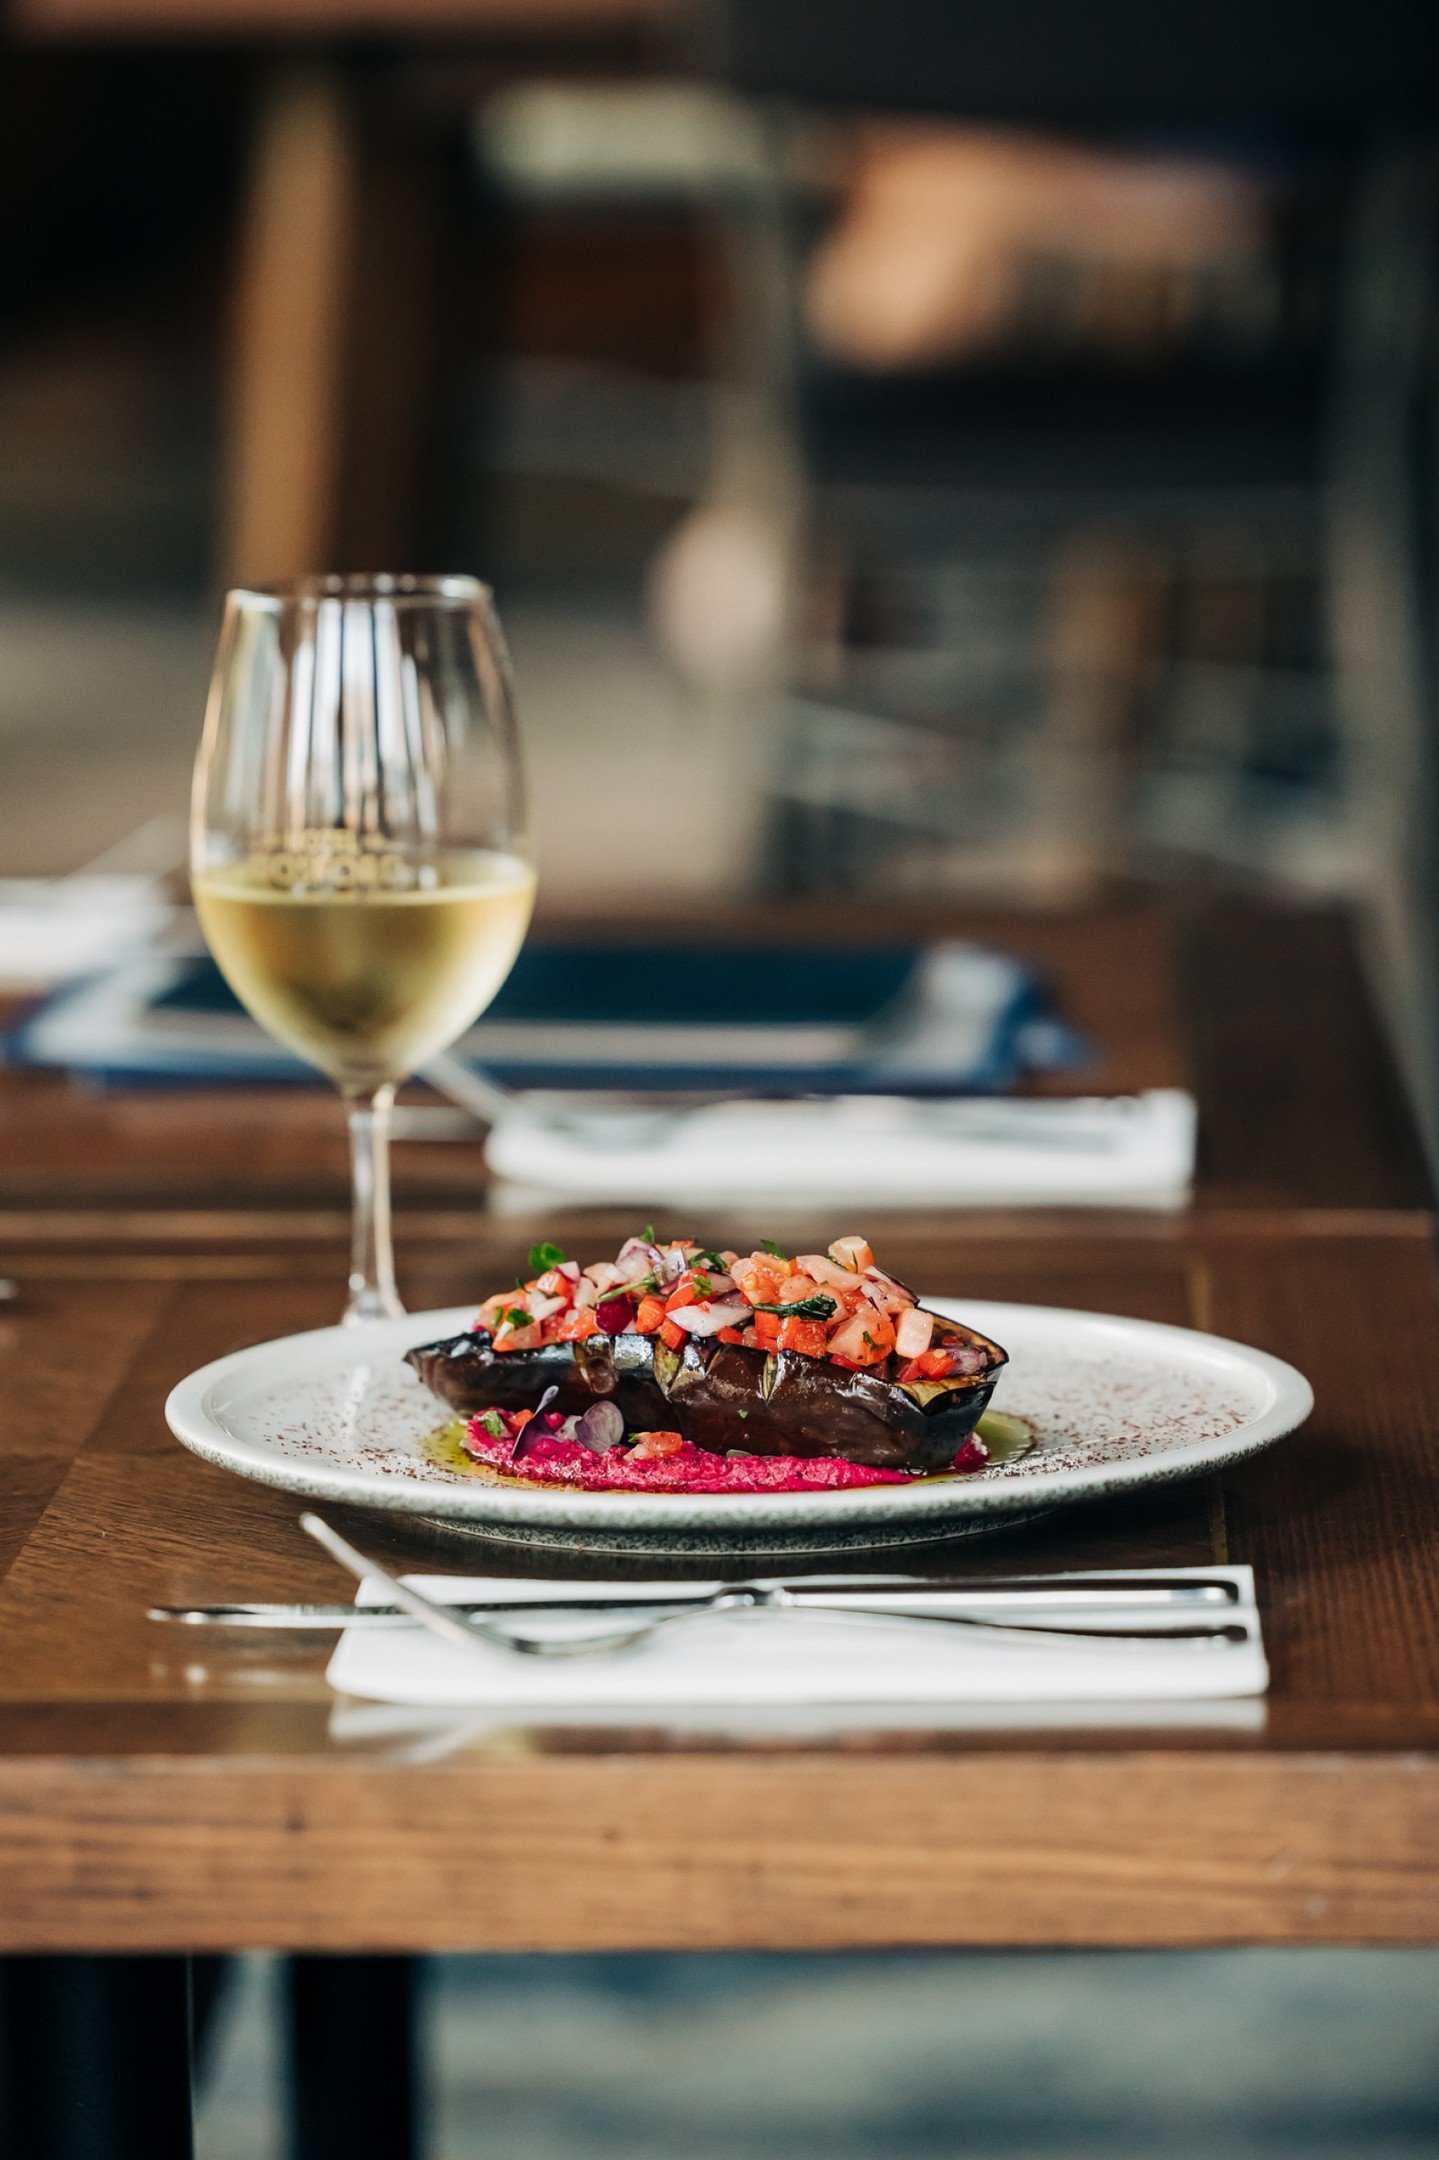 With the arrival of cosy Autumn evenings, there's no better time to wine and dine by the fire at Hotel Gosford.

Starting today, our Spiced Eggplant will be gracing our specials board - served with Roasted Hummus, Salsa Rosa, and Parsley Oil.

Try th